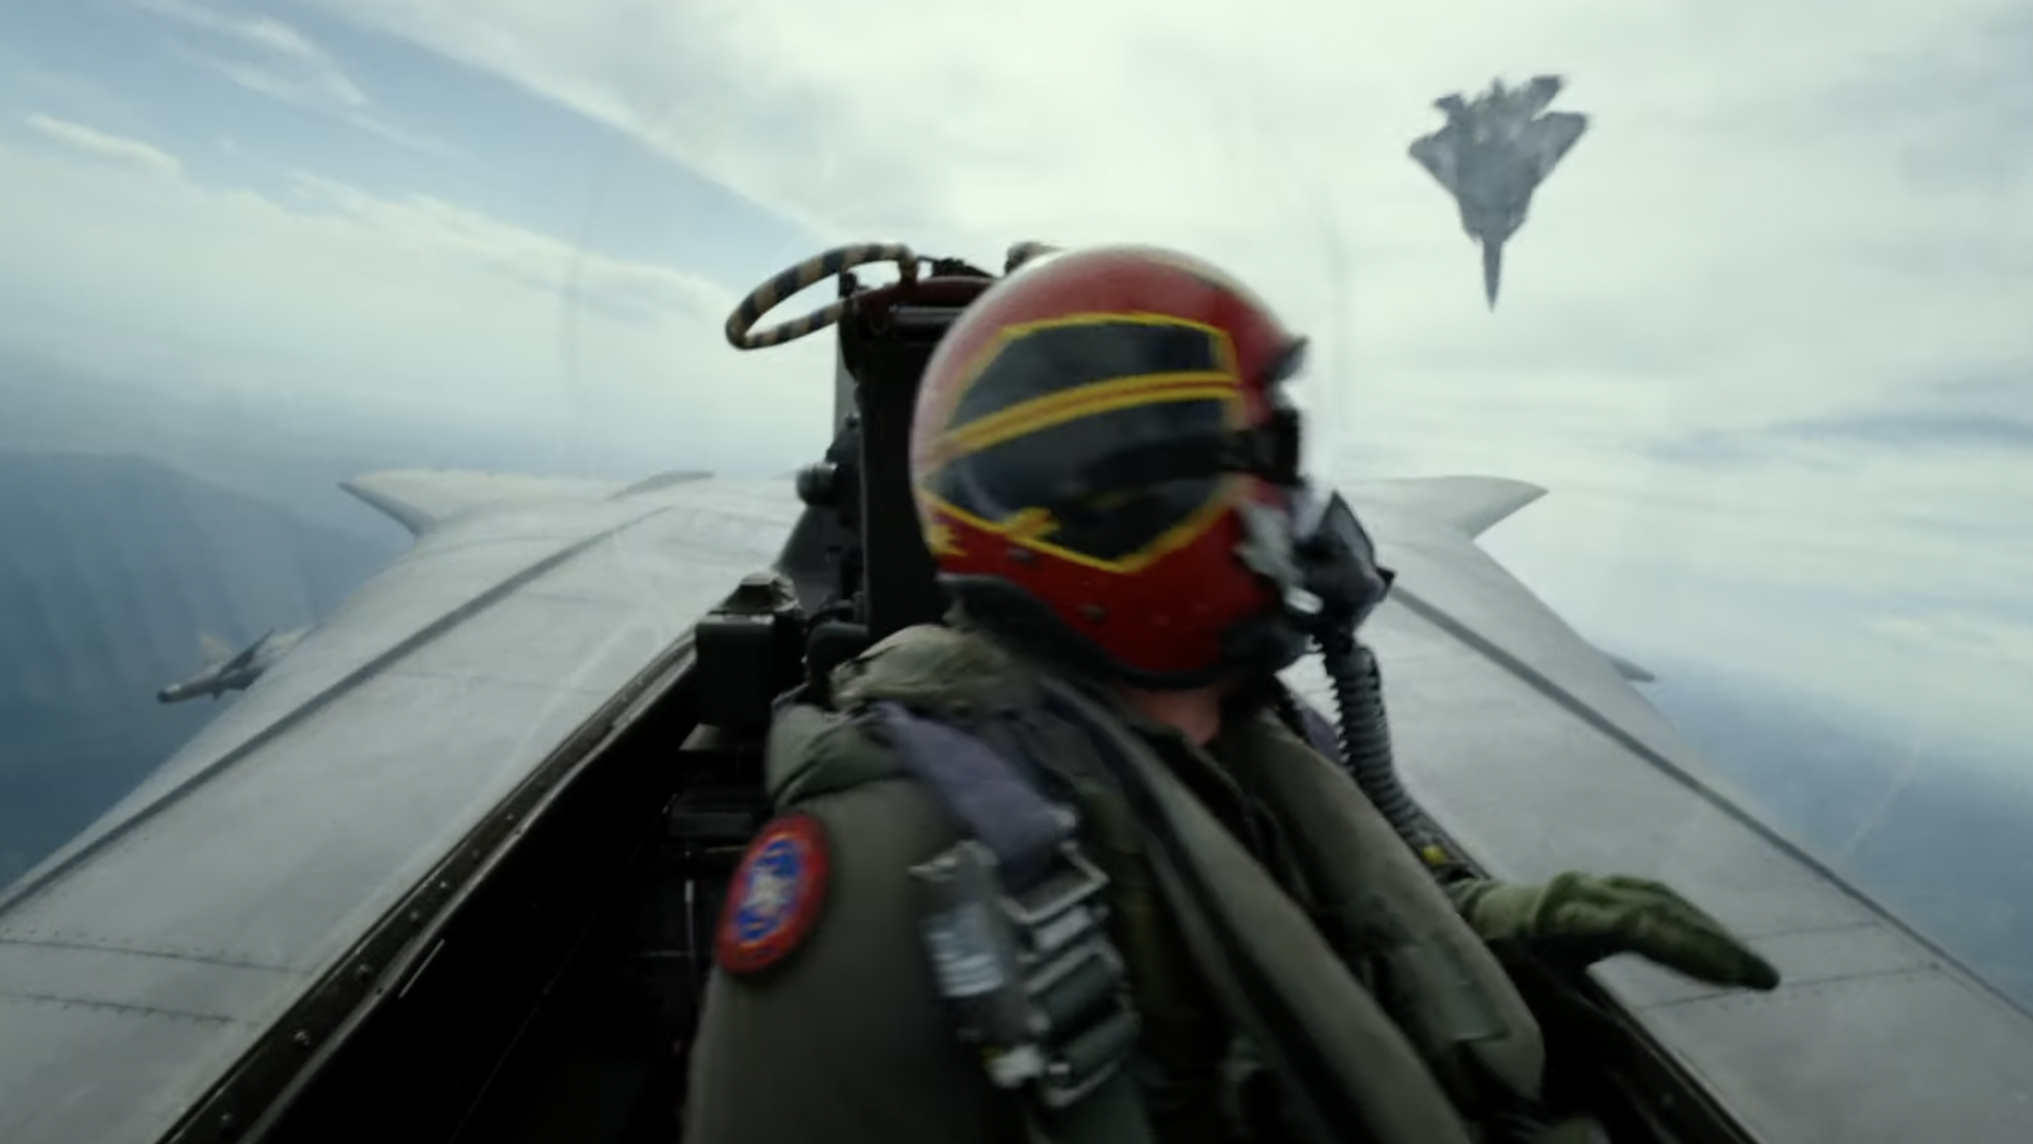 Top Gun Pilot Jet F16 Fighter I Feel The Need for Speed Tom Crew